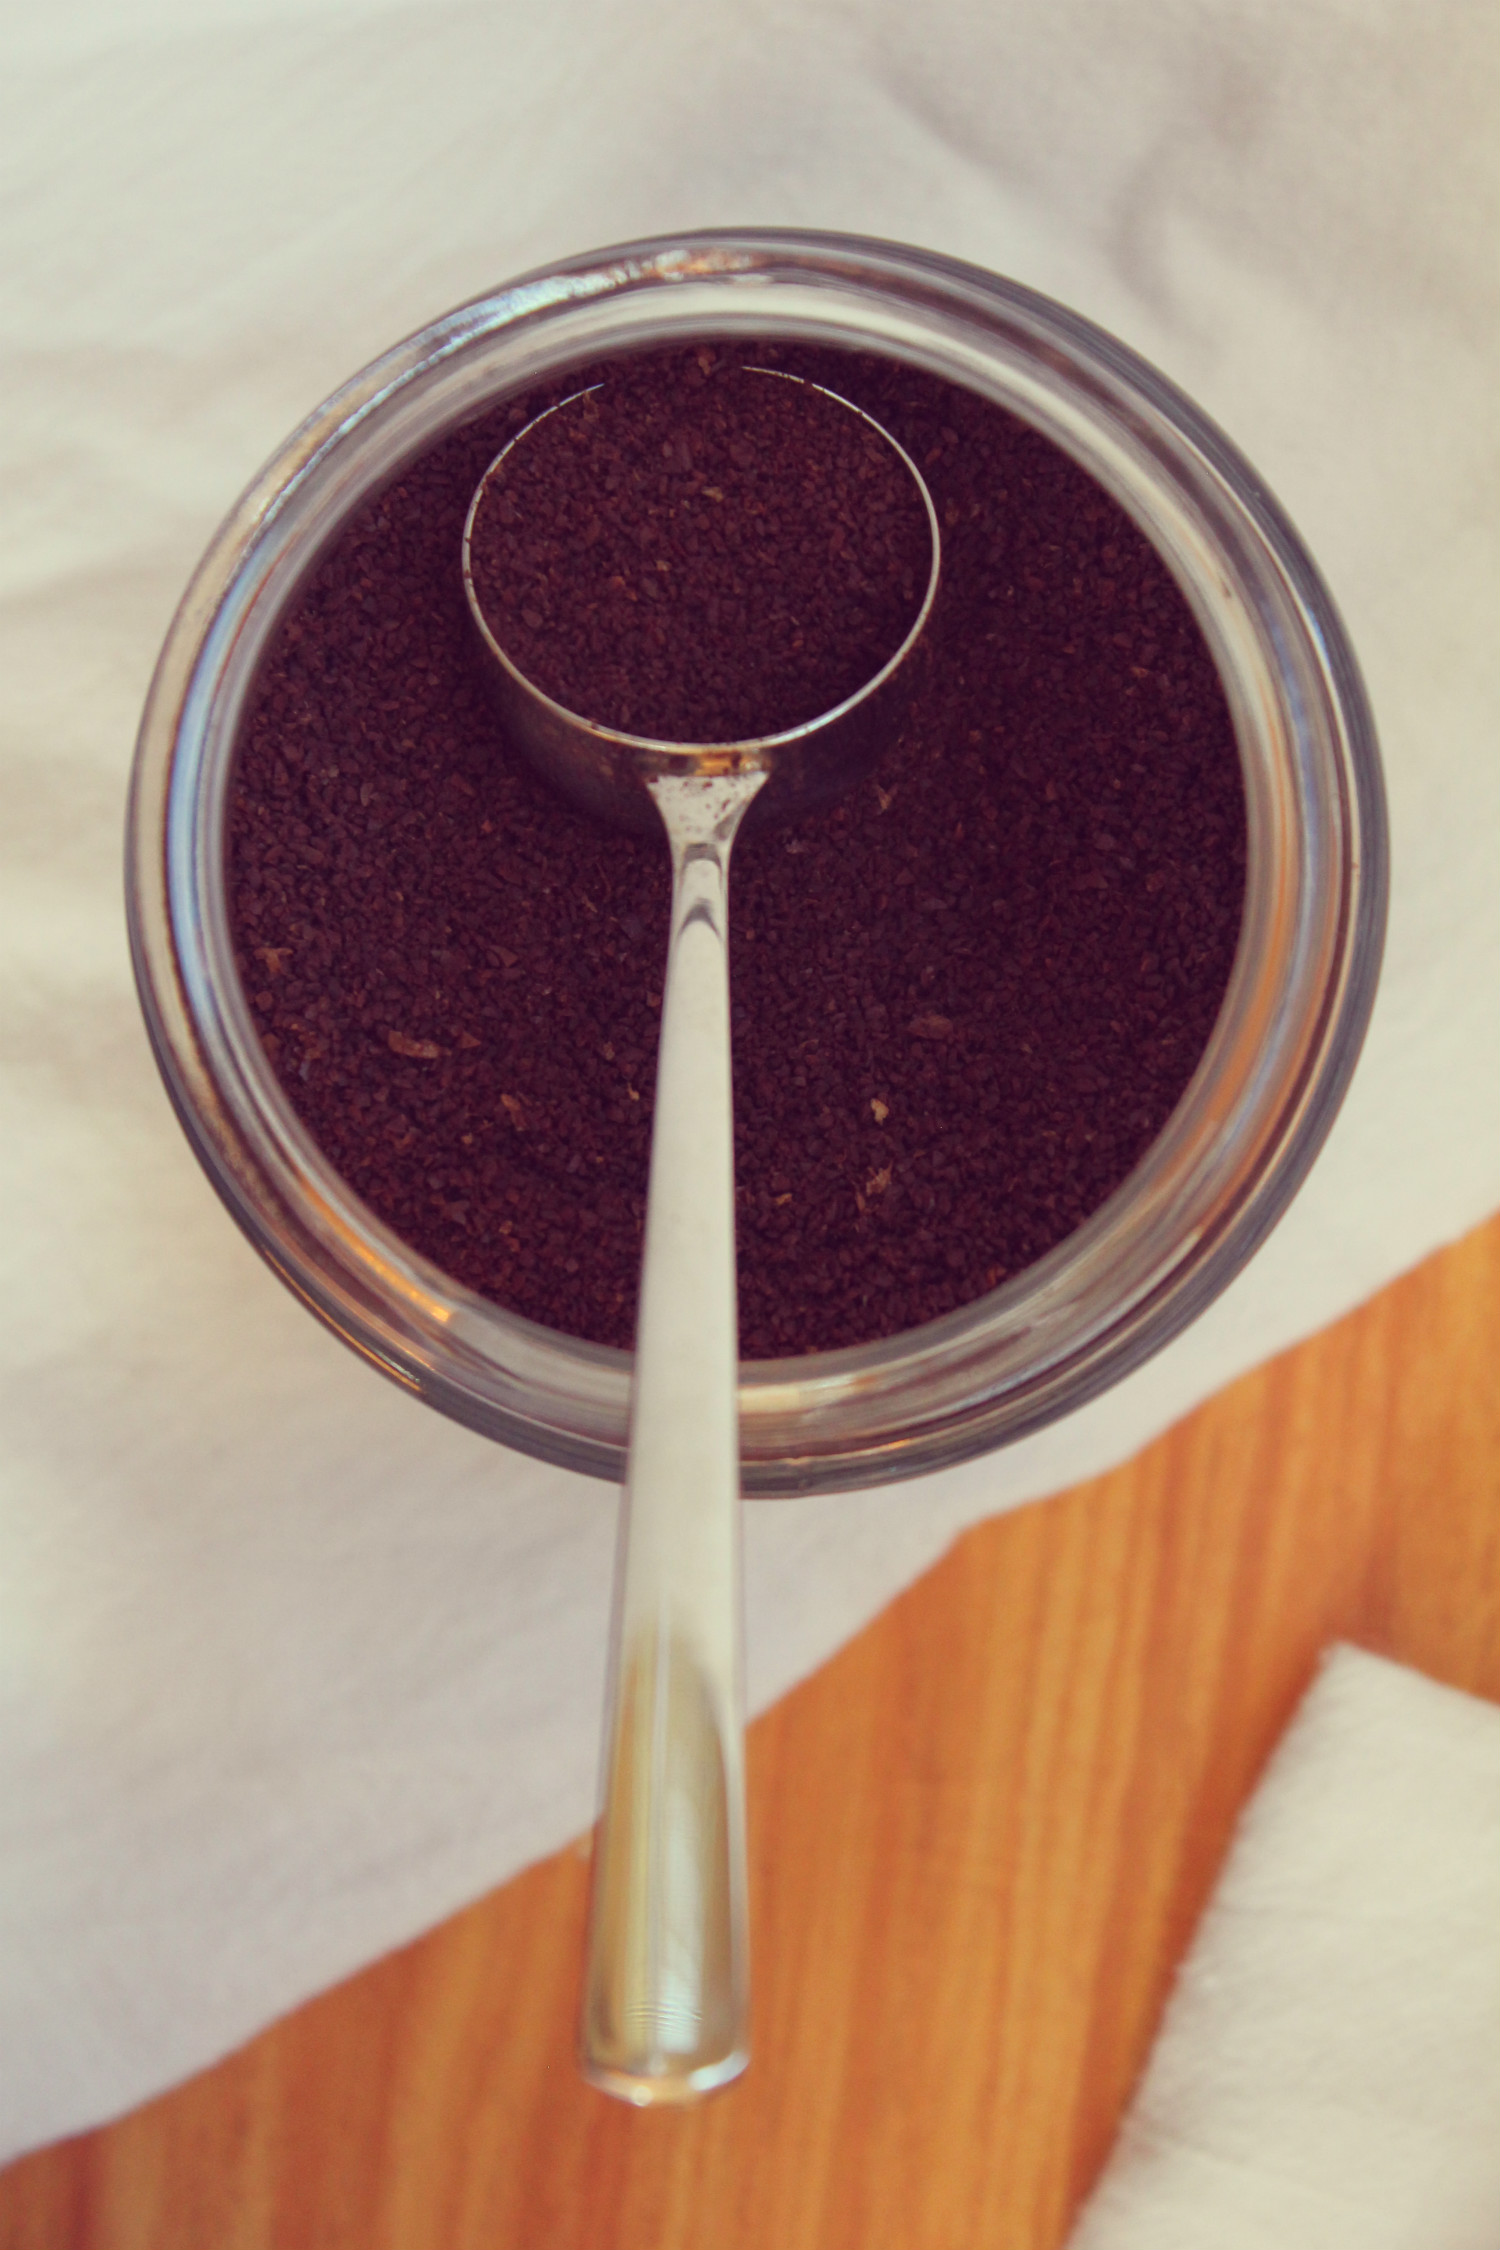 How To Make The Perfect Cup of Coffee | Darling Magazine